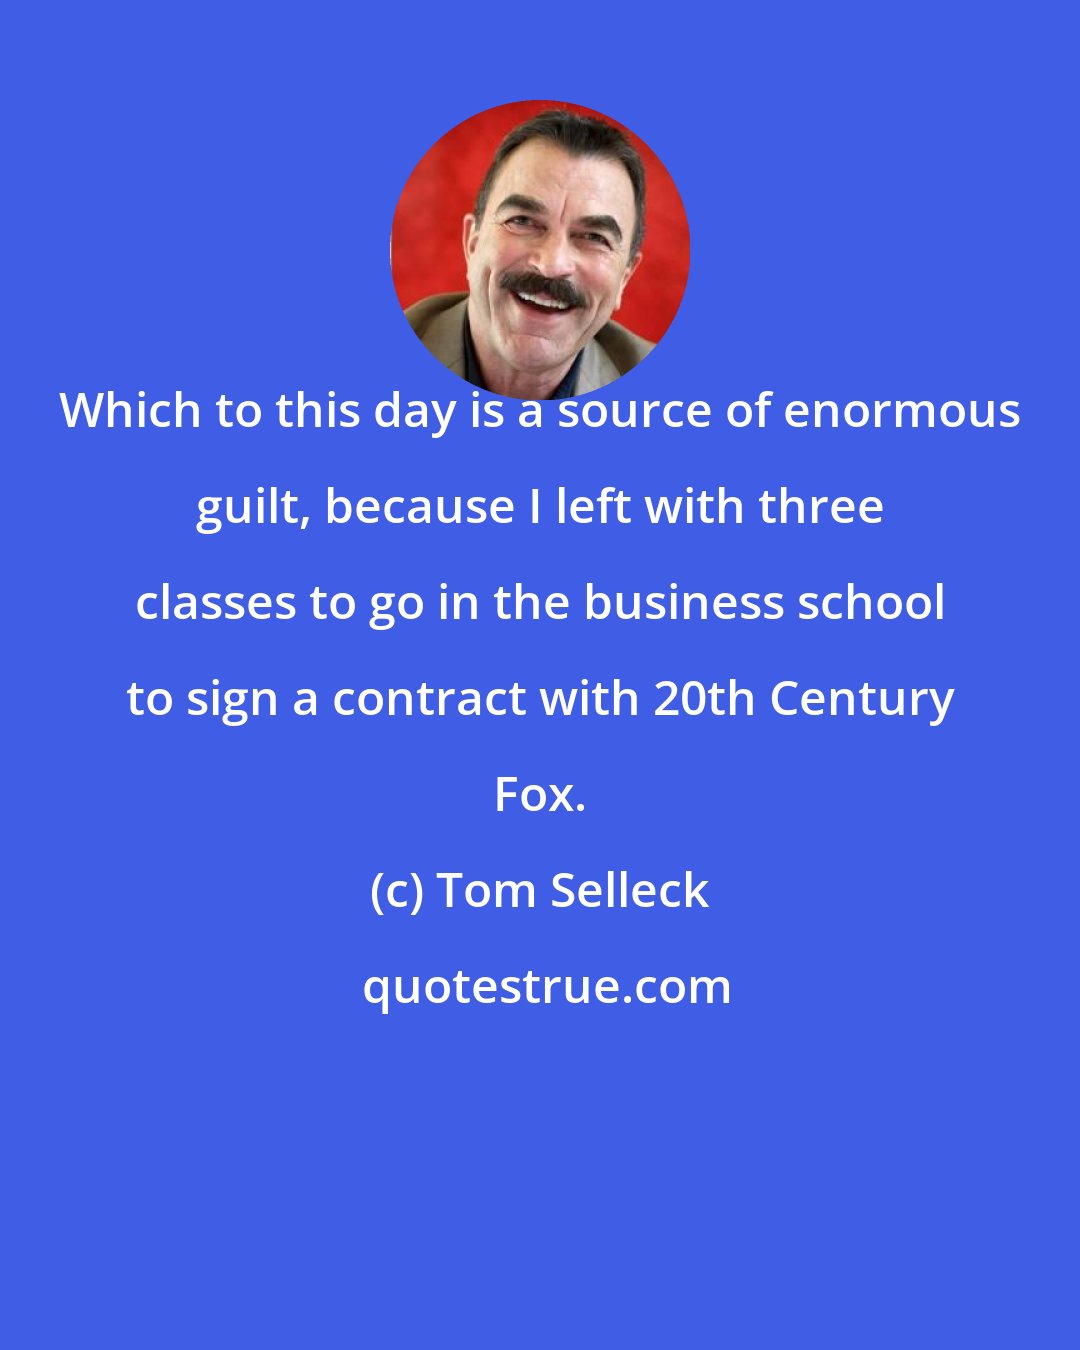 Tom Selleck: Which to this day is a source of enormous guilt, because I left with three classes to go in the business school to sign a contract with 20th Century Fox.